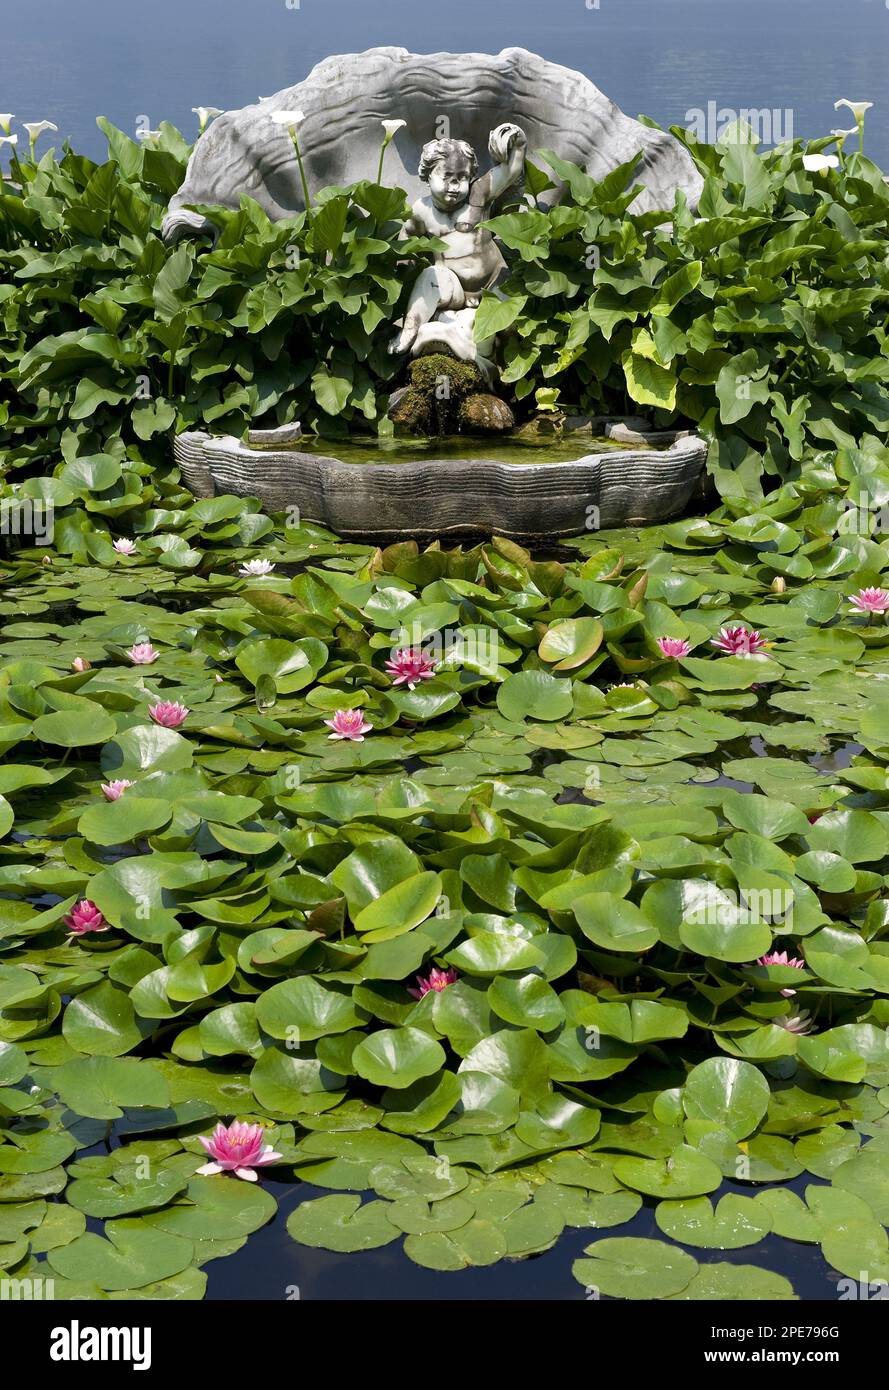 Flowers and leaves of the ornamental water lily (Nymphaea sp.), in ornamental pond with fountain, Villa Melzi, Bellagio, Lake Como, Lombardy, Italy Stock Photo